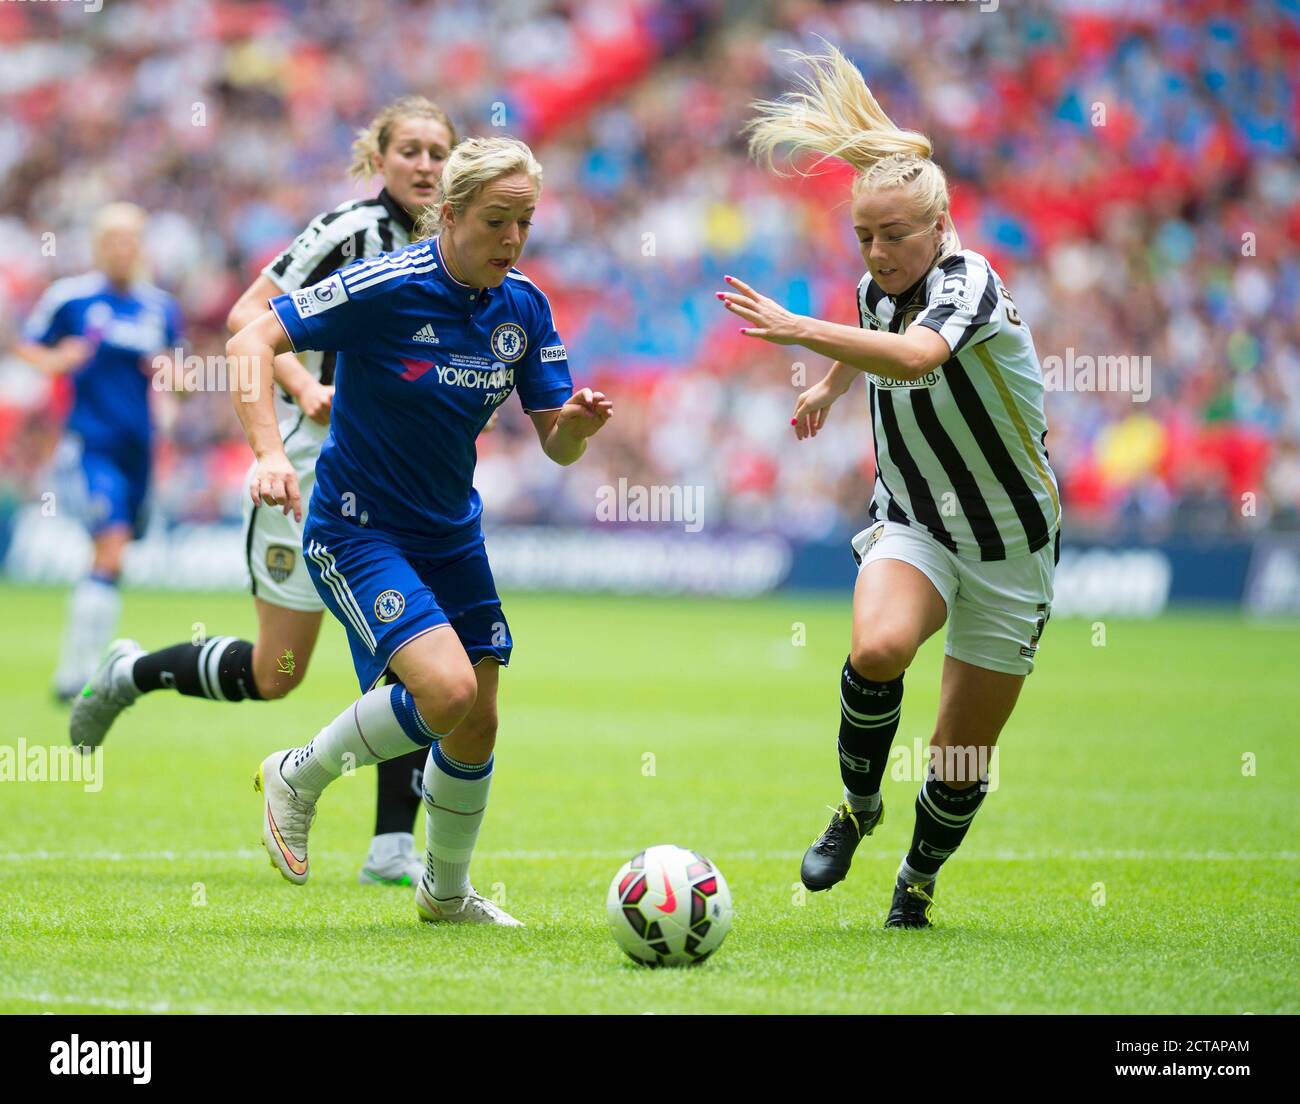 GEMMA DAVISON TAKES ON ALEX GREENWOOD  Chelsea v Notts County Womens FA Cup Final - Wembley  Picture : Mark Pain / ALAMY     PHOTO CREDIT : © MARK PA Stock Photo